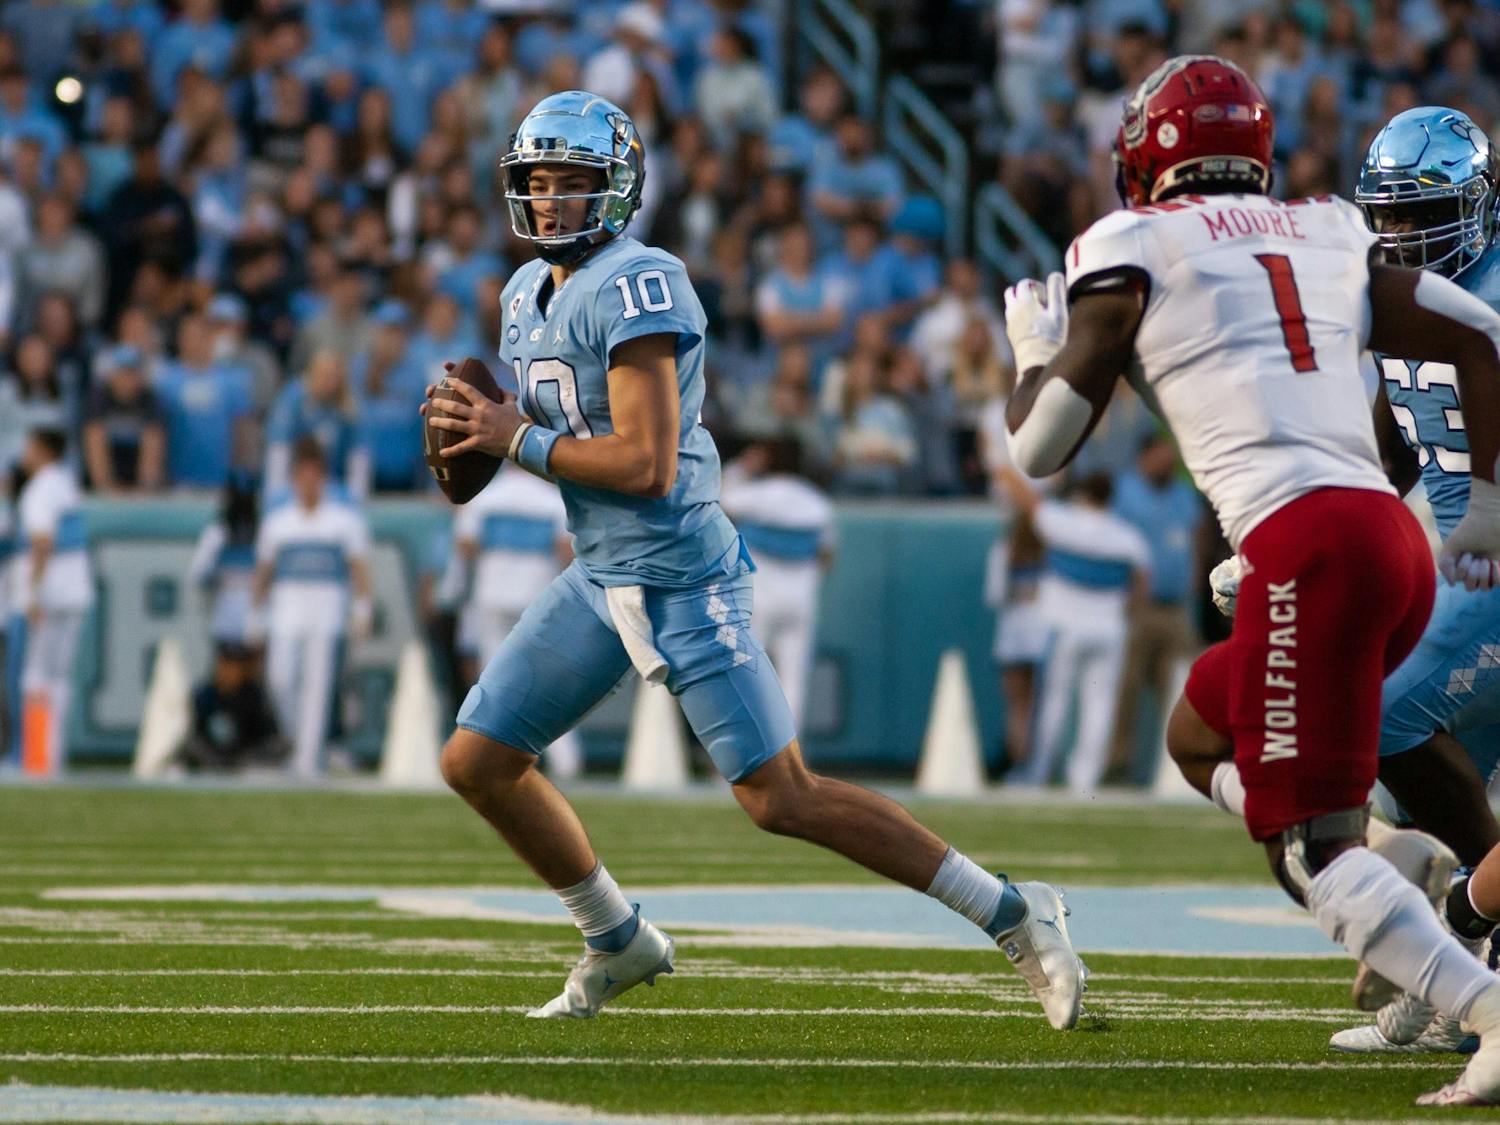 UNC red-shirt first-year, Drake Maye (10), throws a pass in Kenan Stadium on Nov. 25, 2022, as the Tar Heels face off against the NC State Wolfpack.